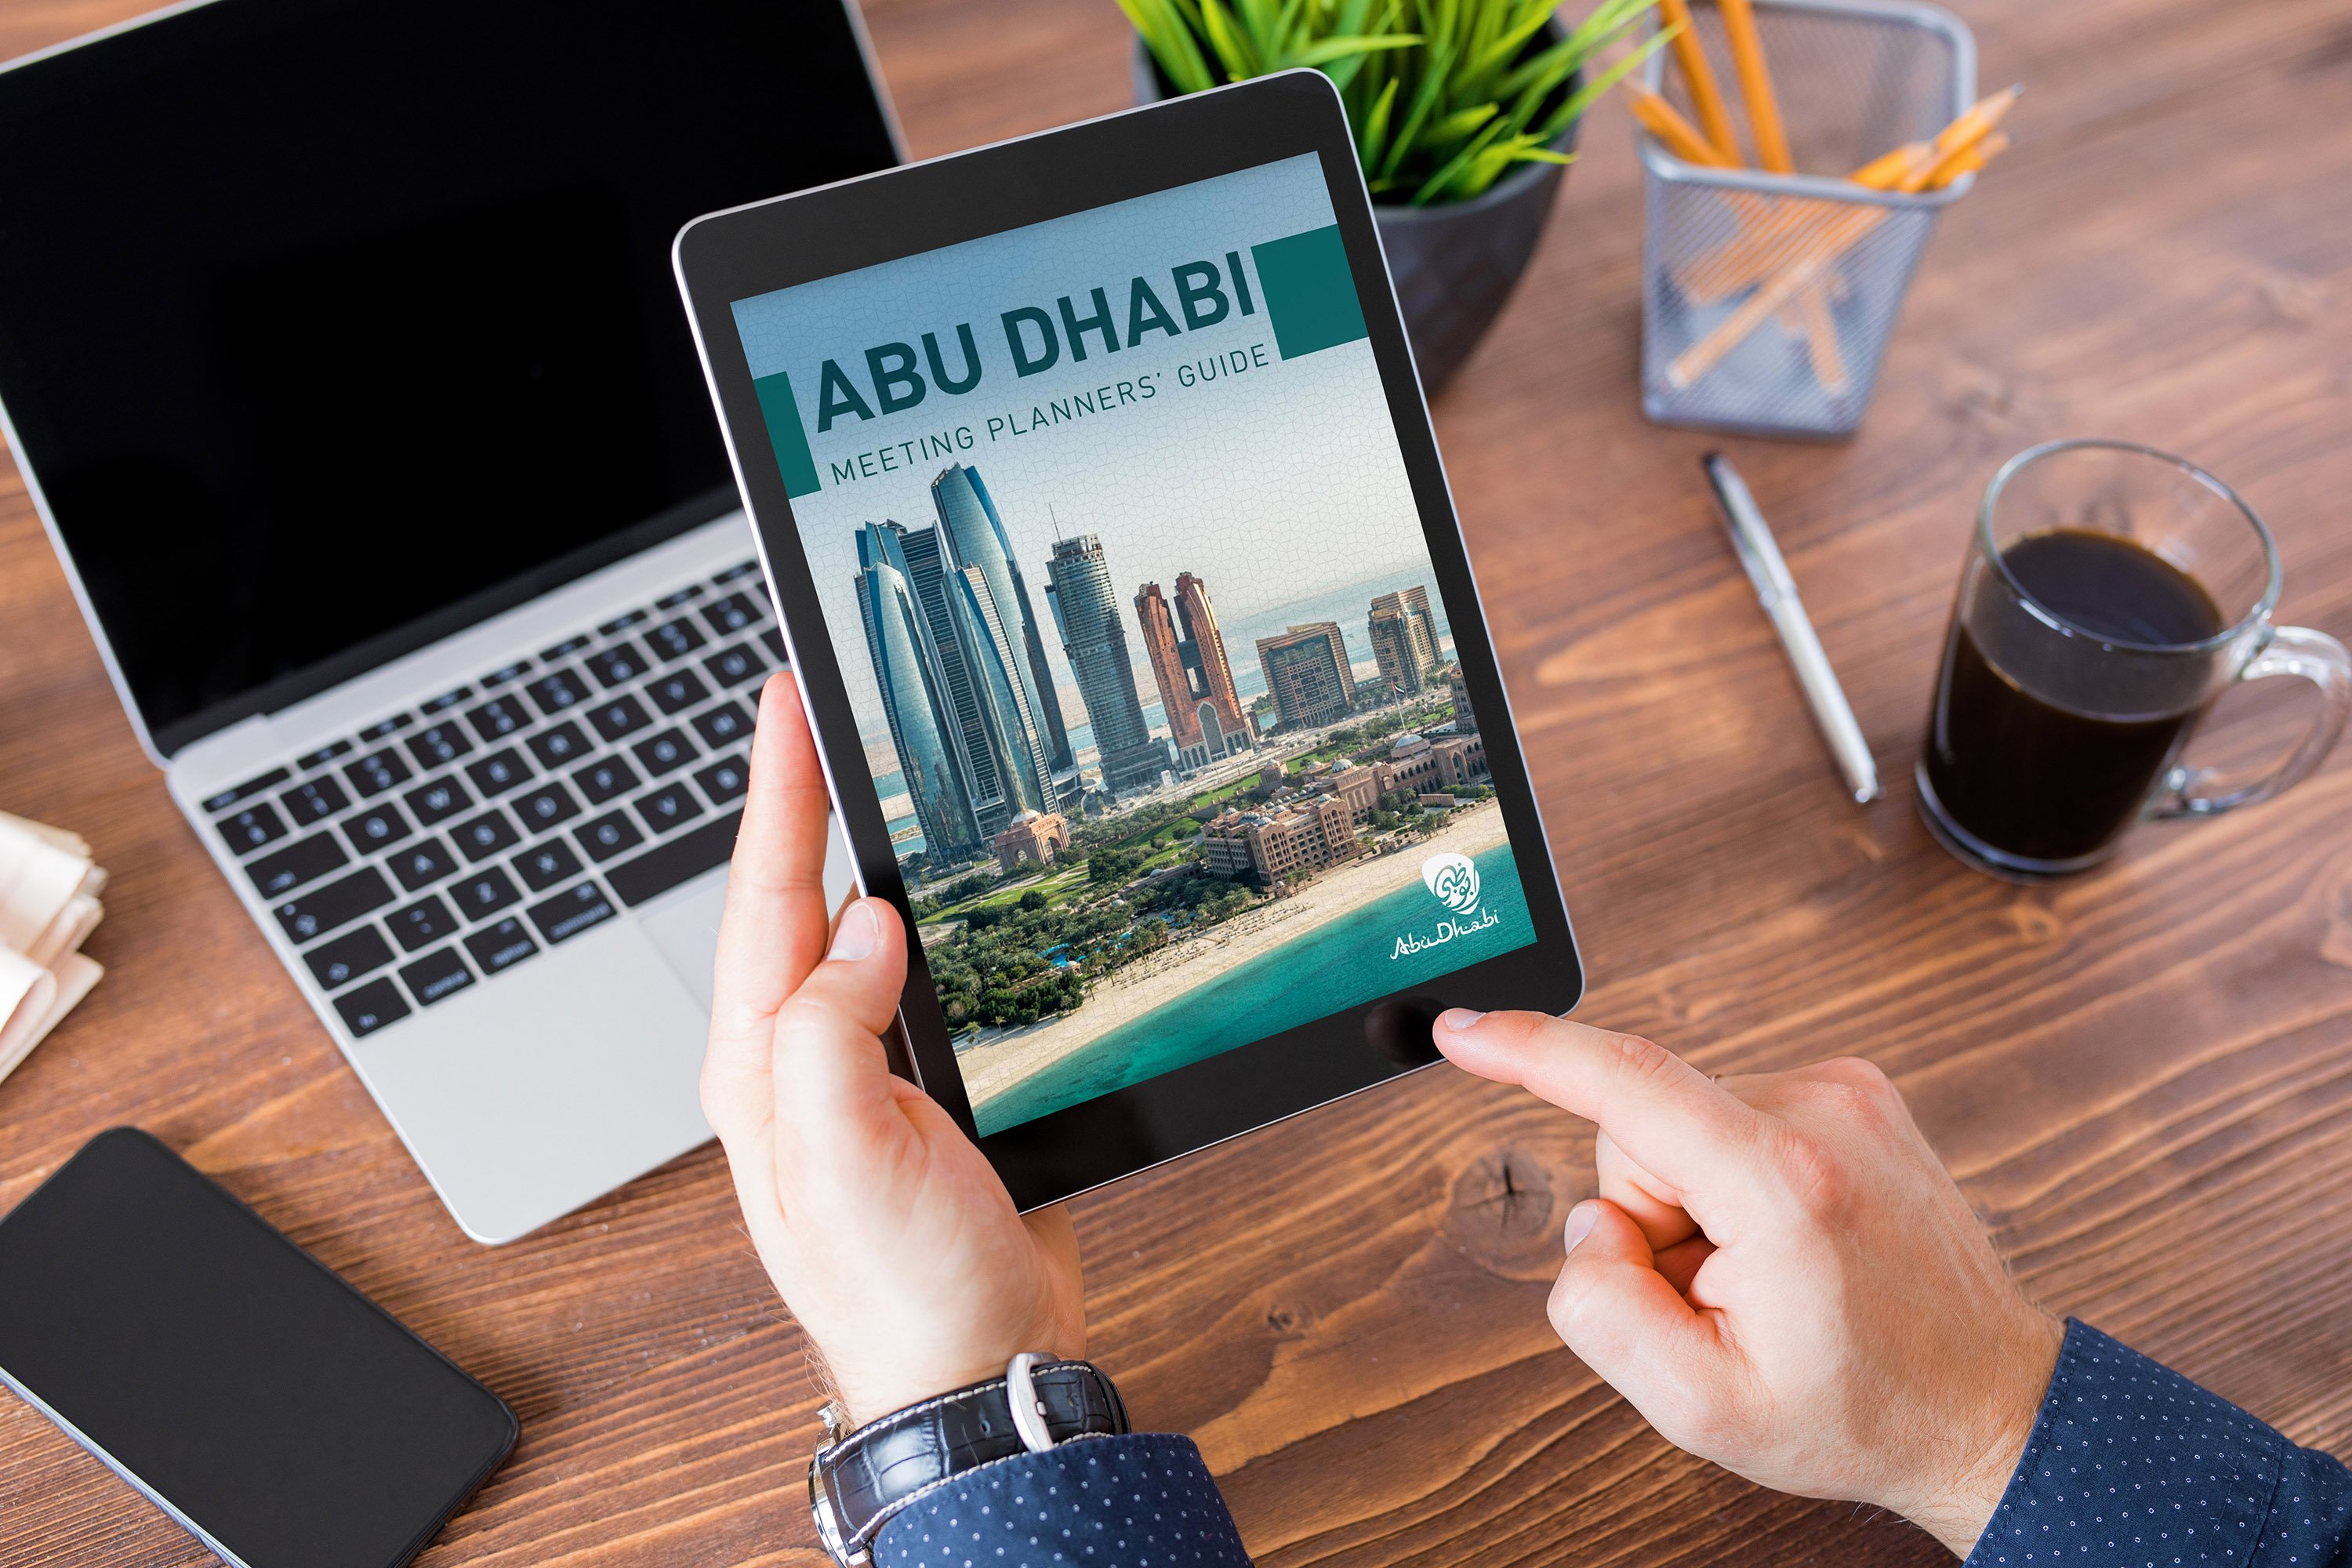 Abu Dhabi Meeting Planners' Guide displayed on a tablet